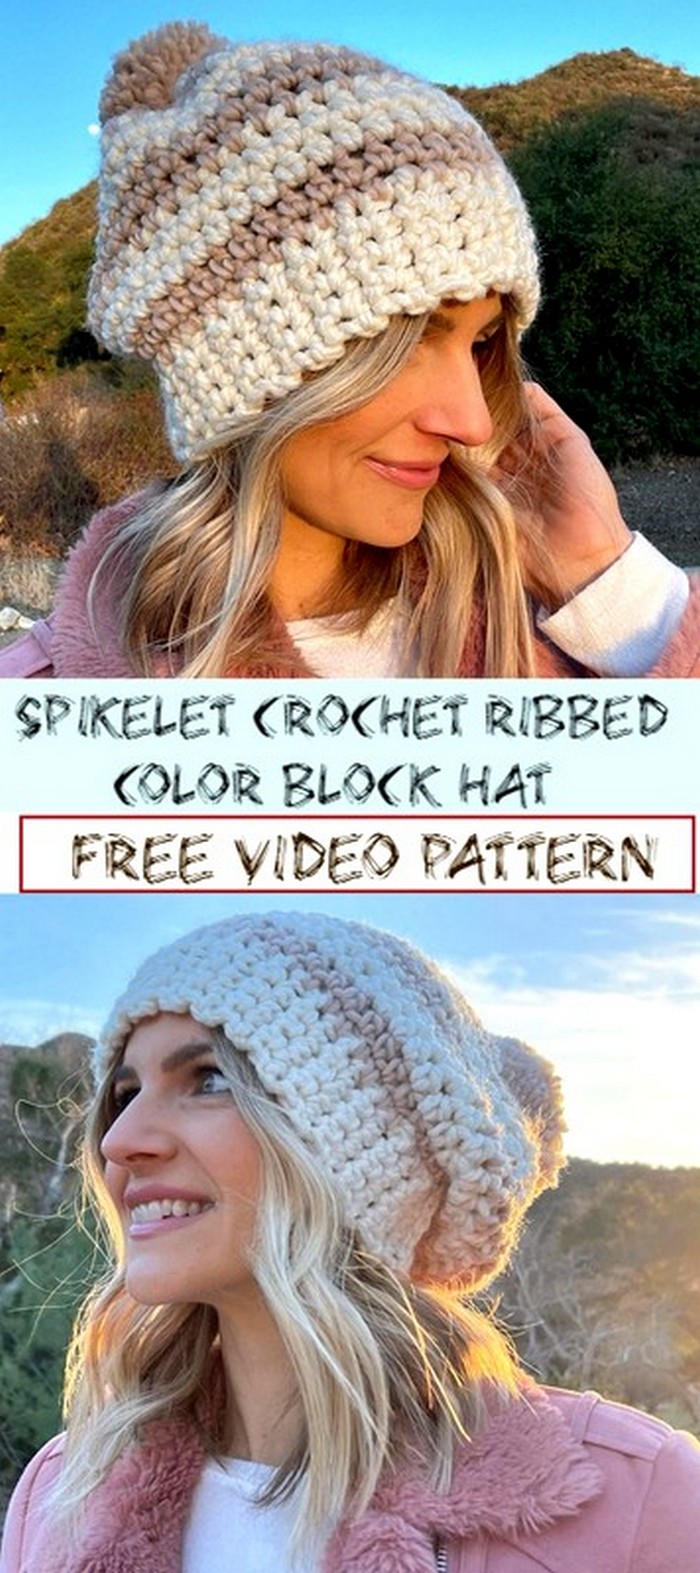 Spikelet Crochet Ribbed Color Block Hat